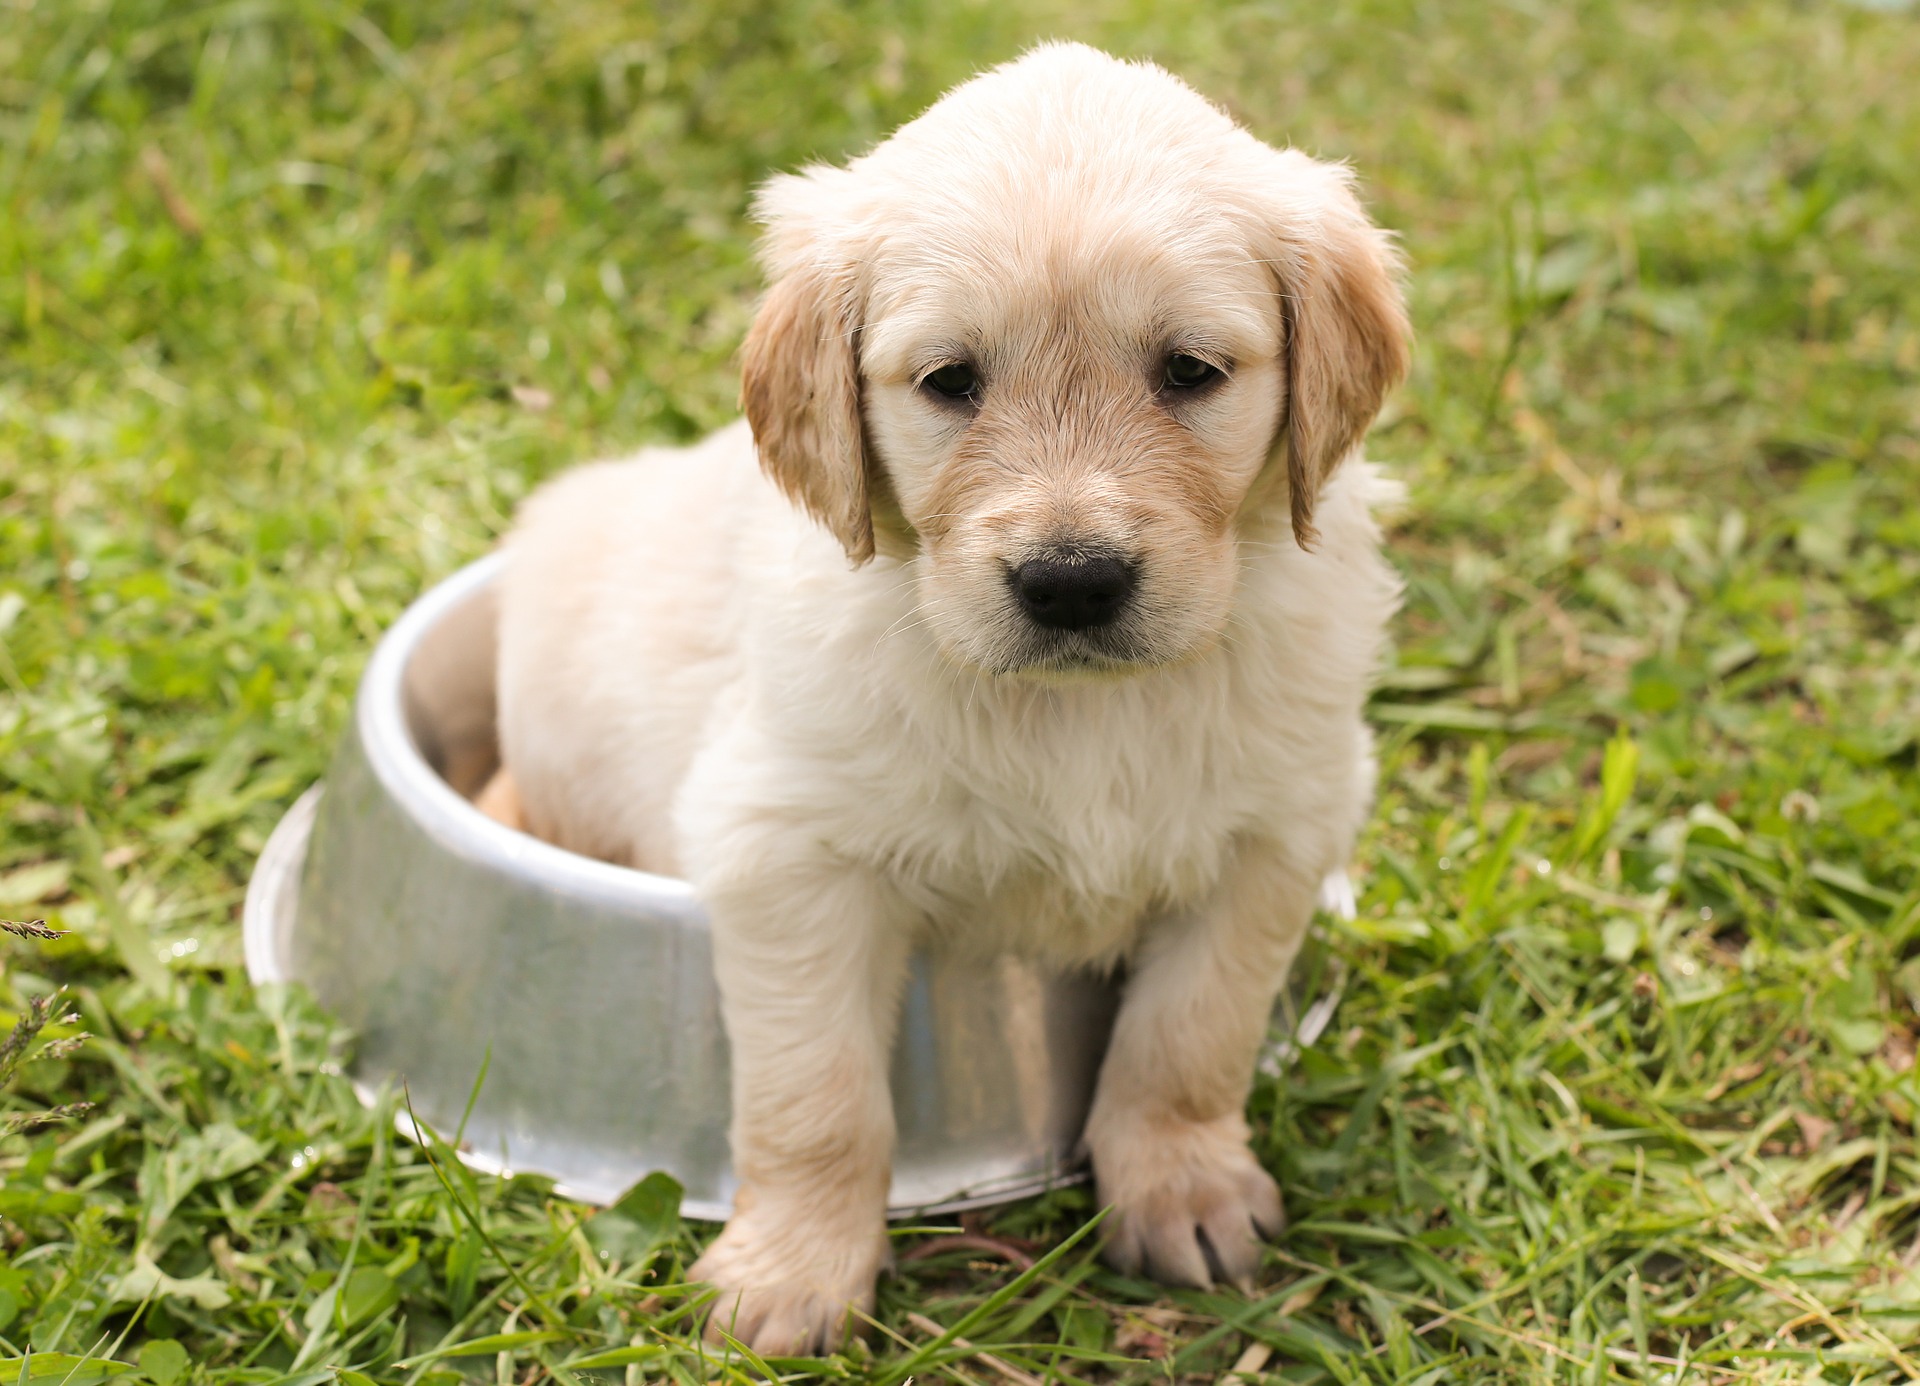 food aggression in puppies